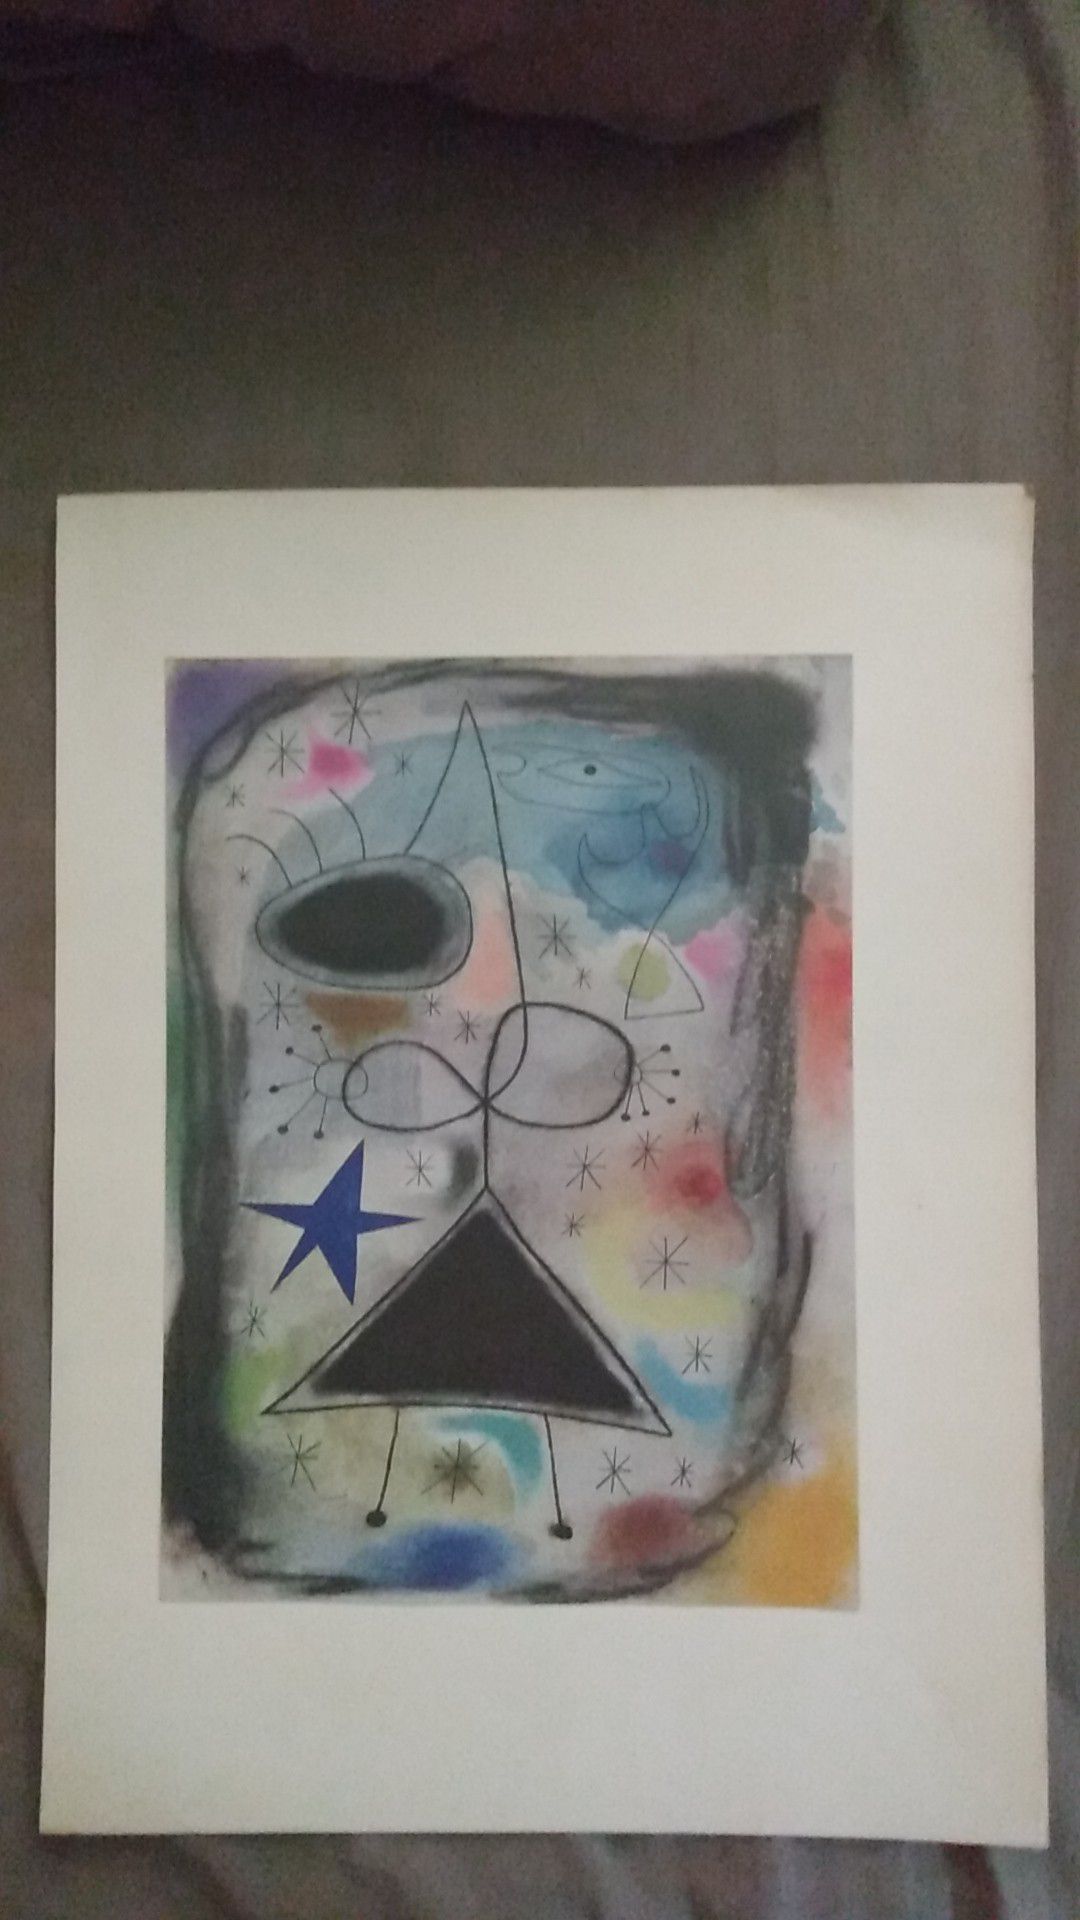 Joan Miro 1940s lithograph of the "Woman in the night"